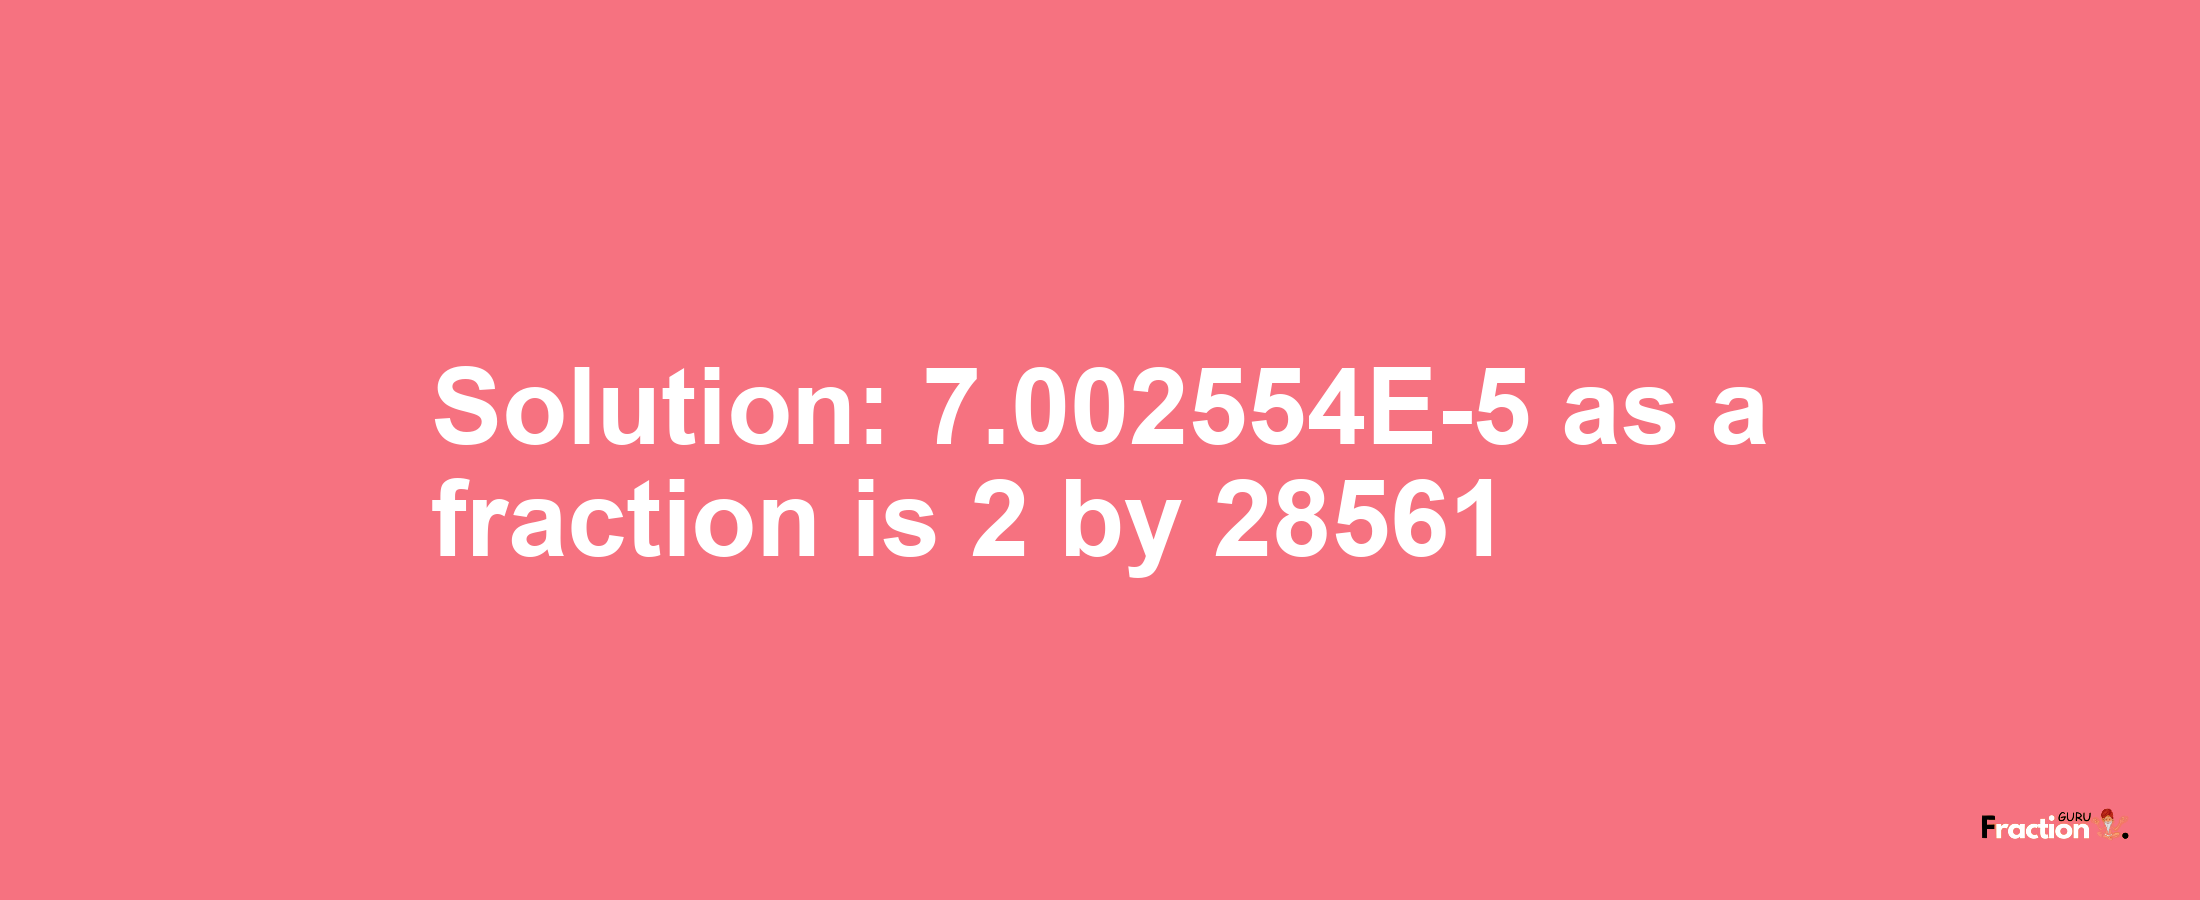 Solution:7.002554E-5 as a fraction is 2/28561